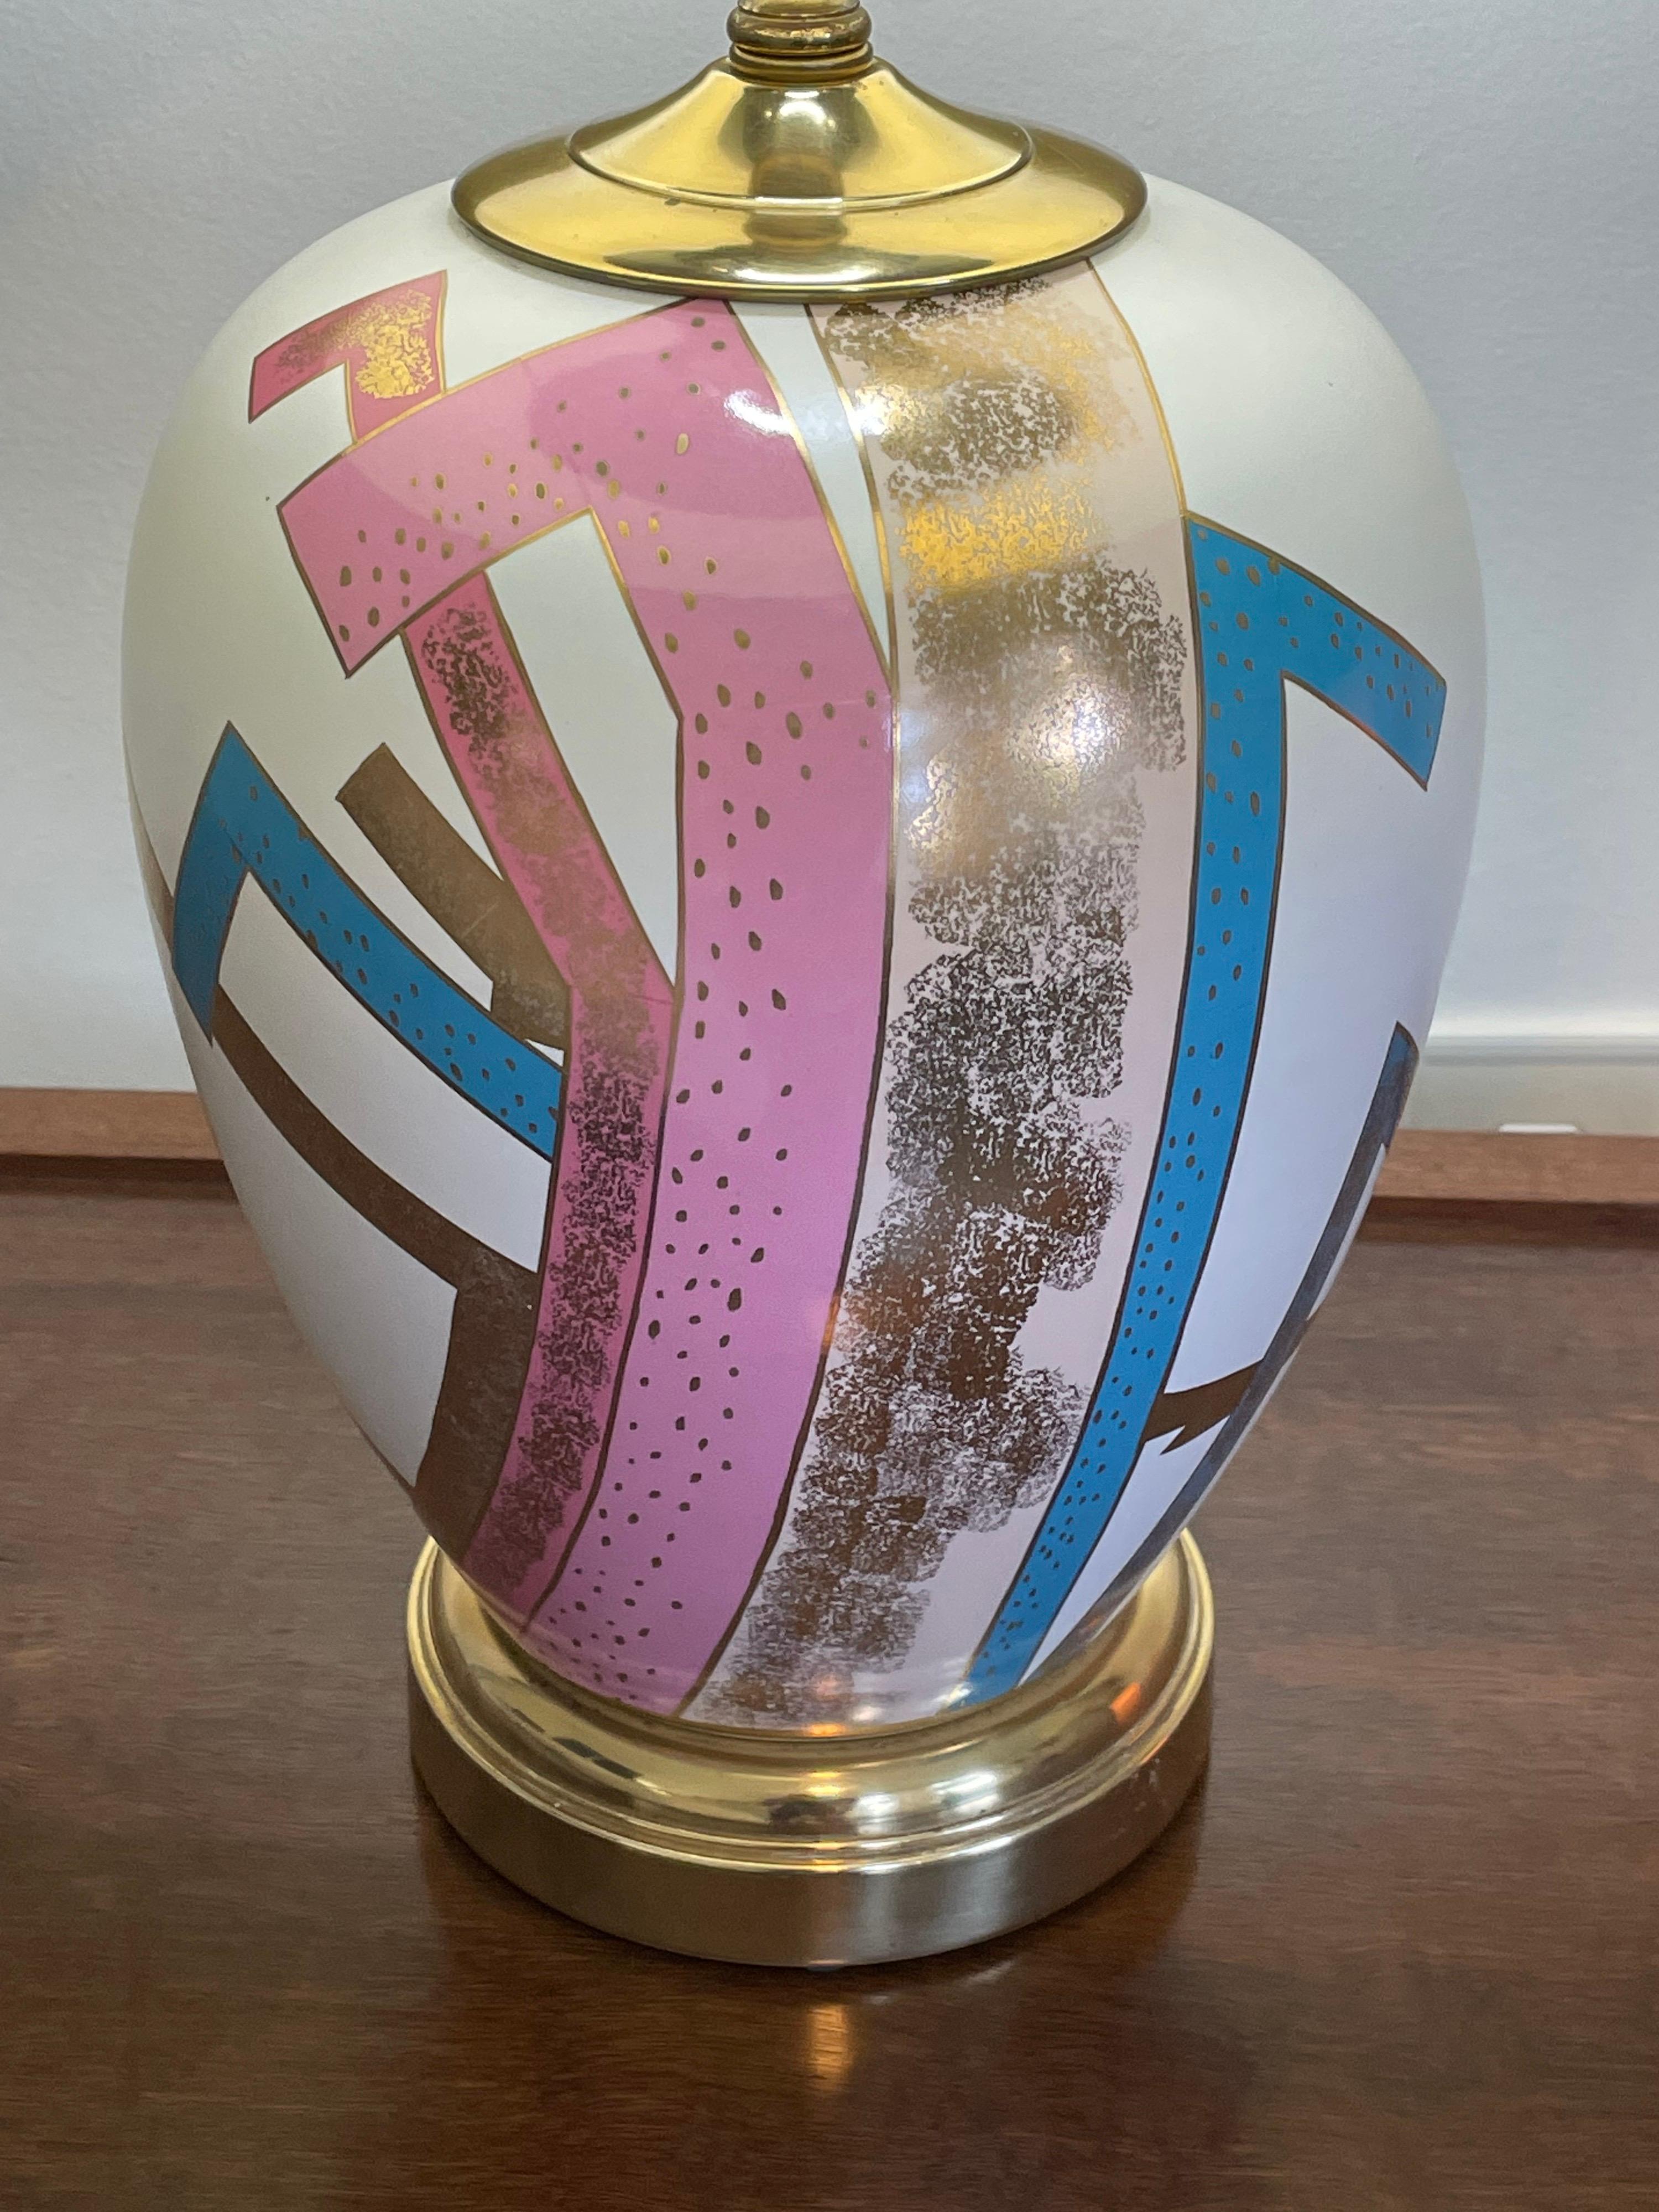 Beautiful post modern glazed ceramic table lamp, vibrant colorful geometric pattern. Japan 1980's

Shade not included.